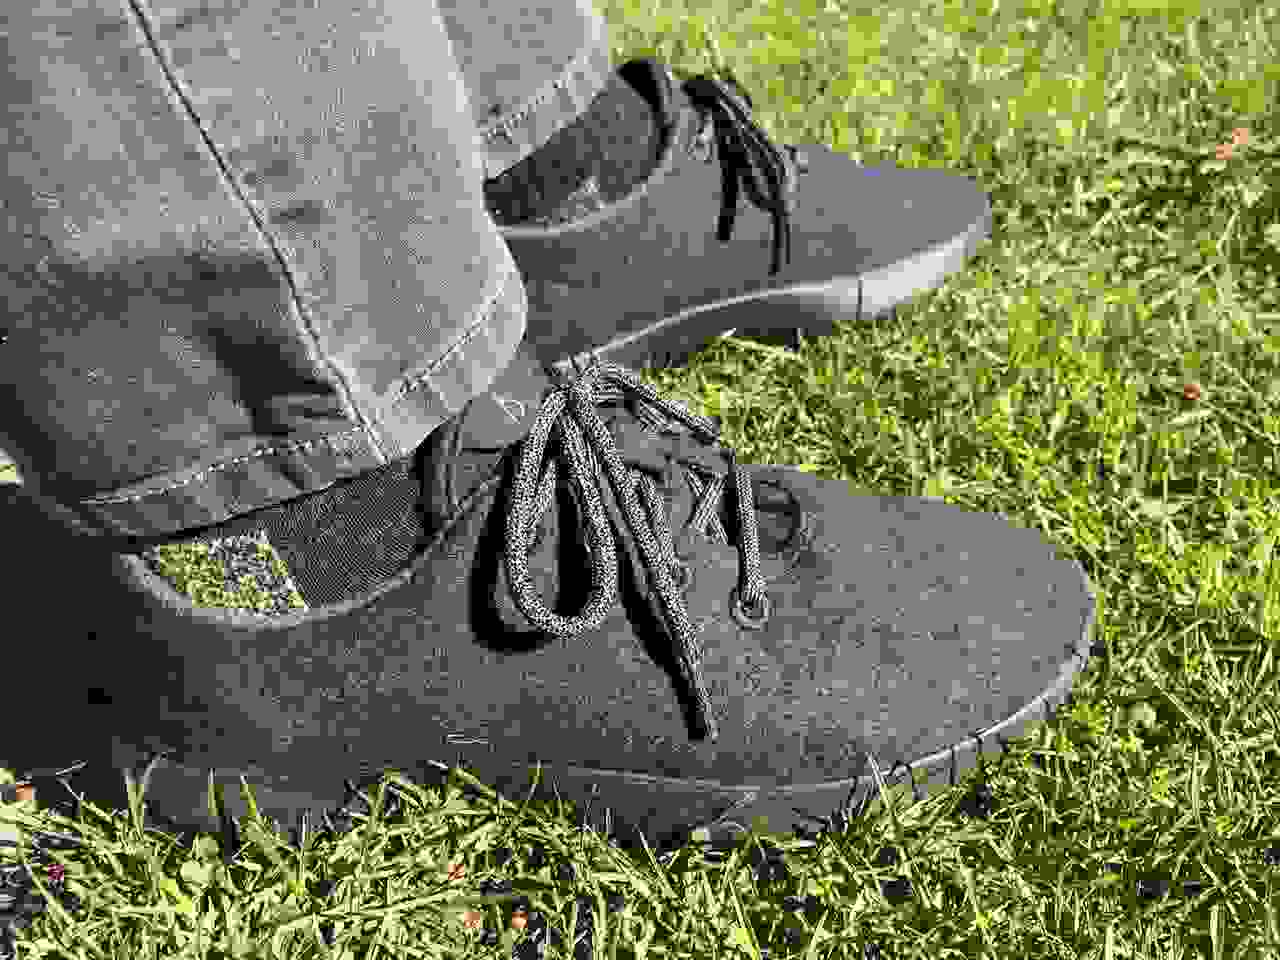 Allbirds lounging in the grass